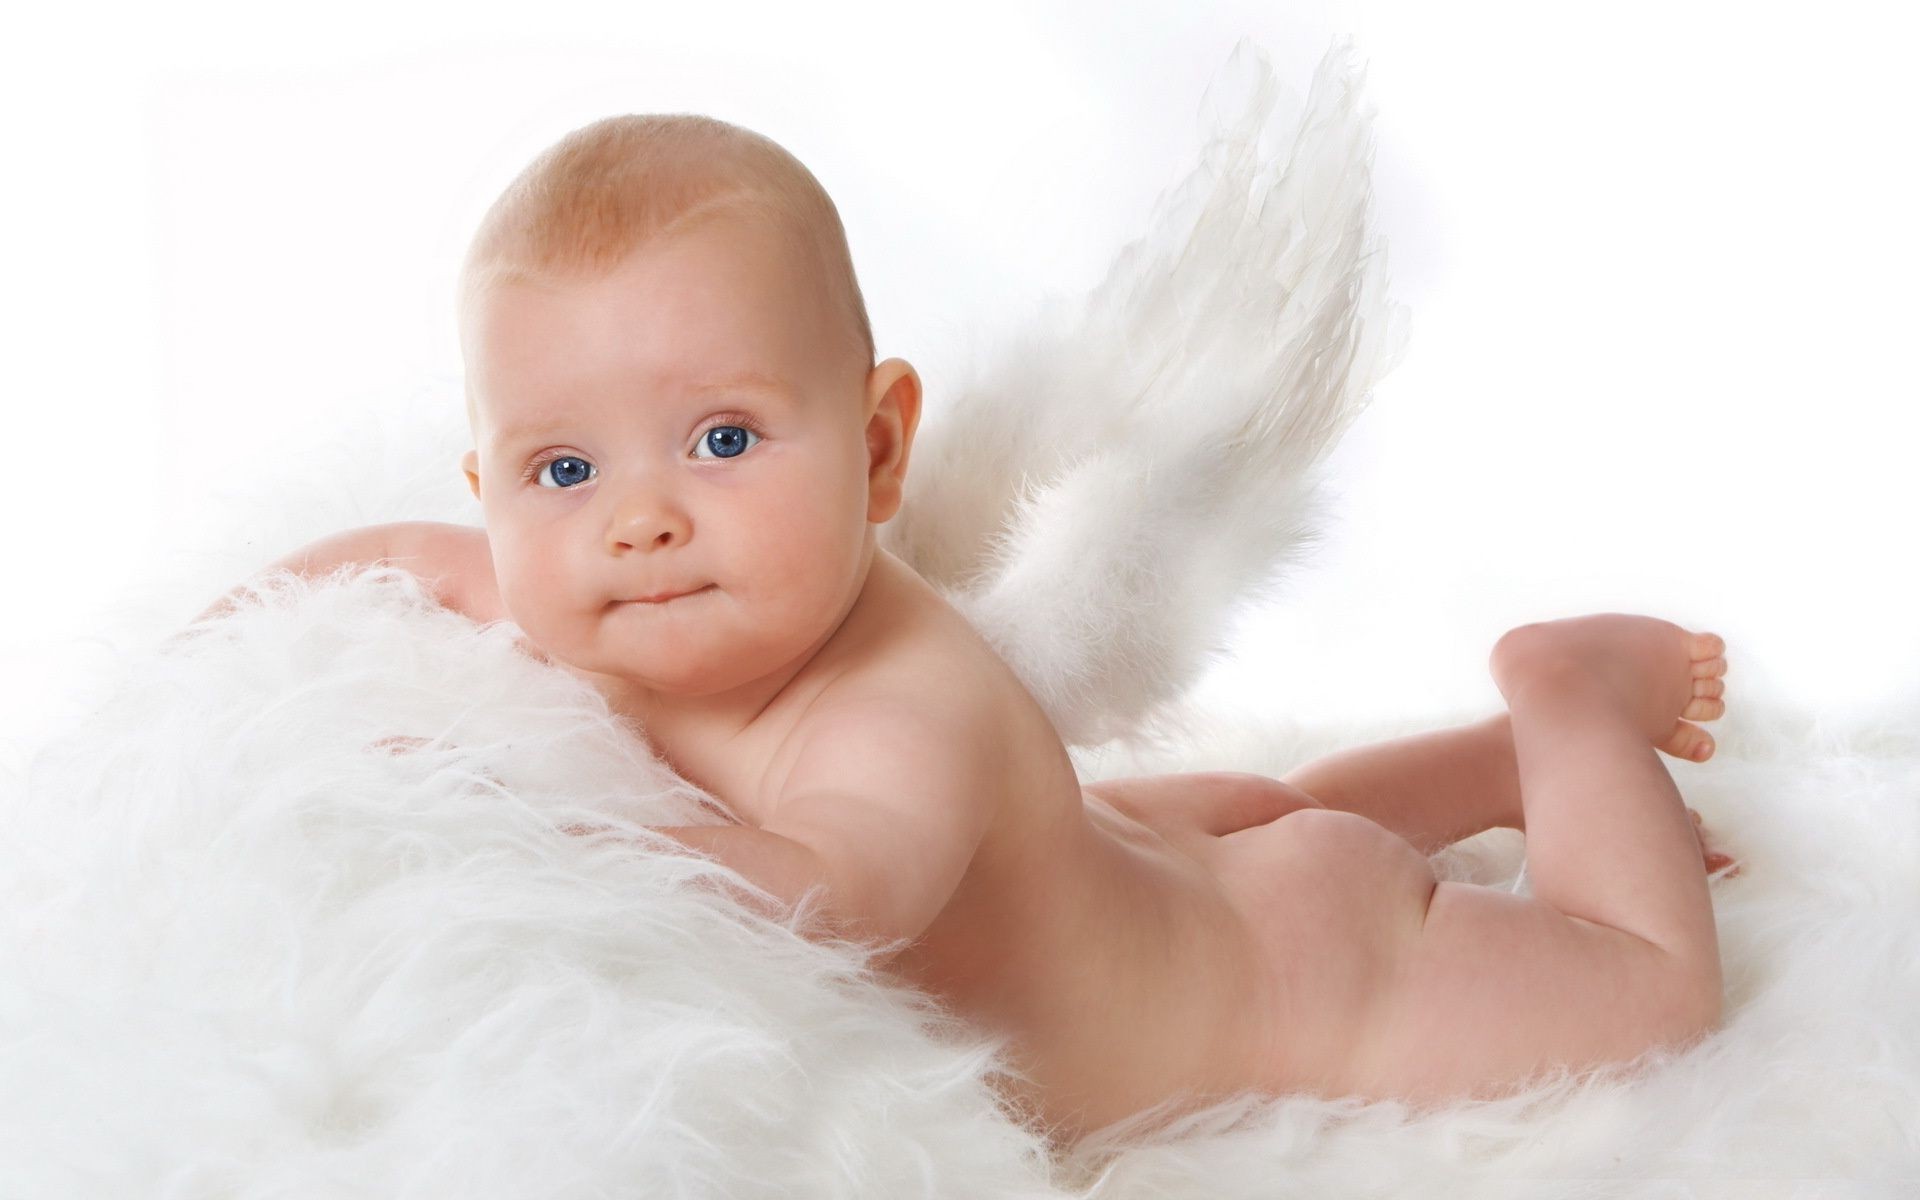 Angels child baby innocence little cute nude precious fun HD wallpaper. Android wallpapers for free